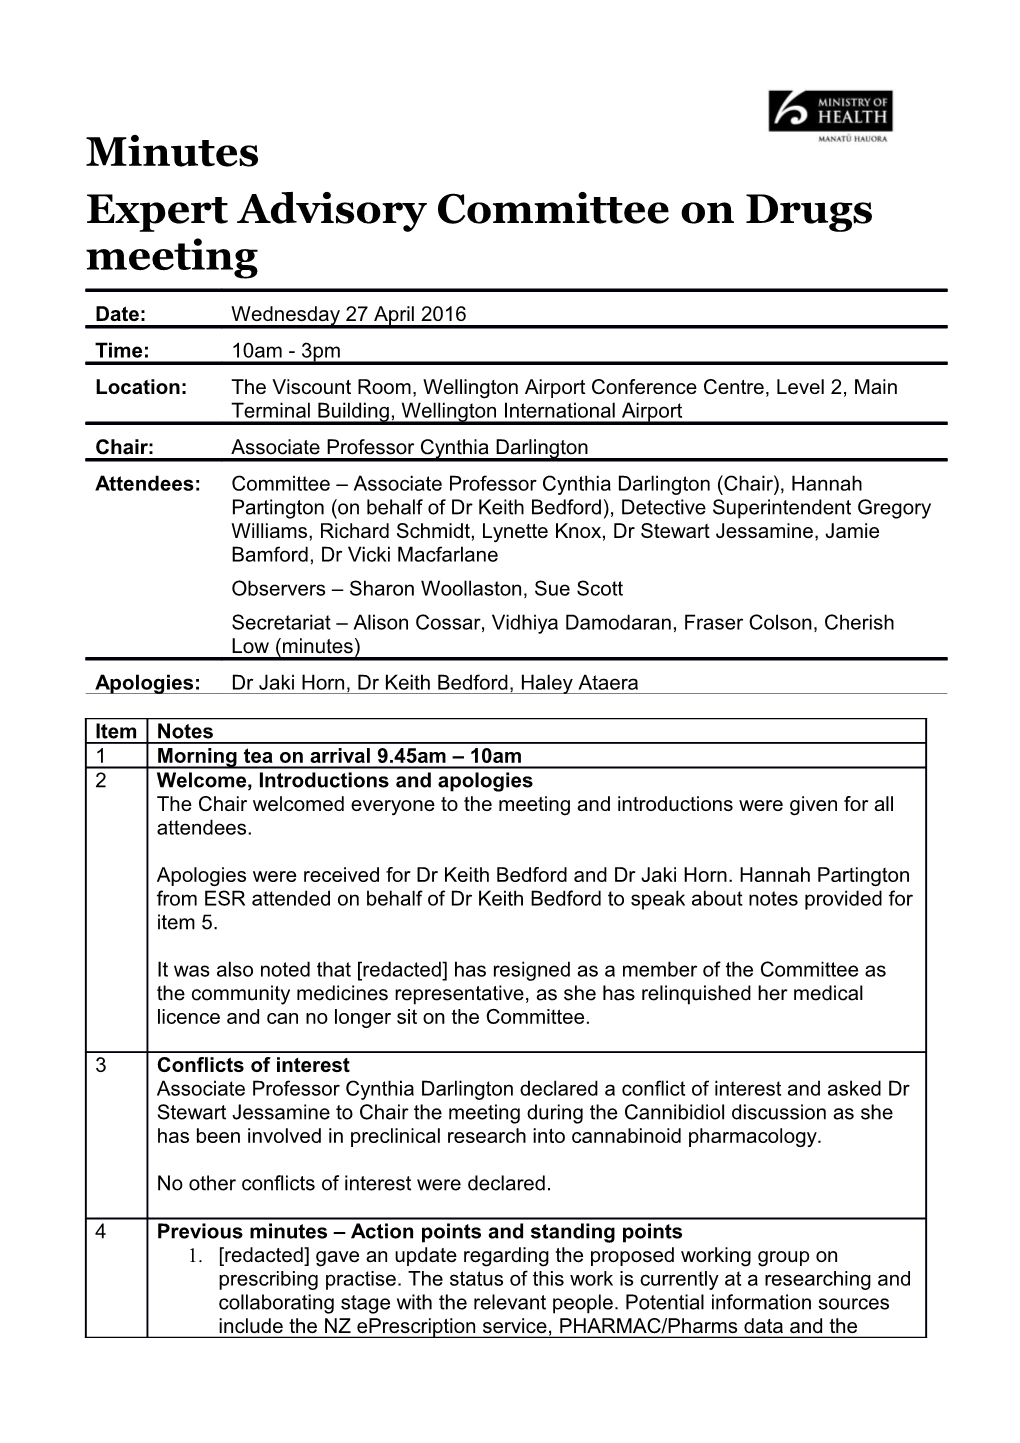 Minutes: Expert Advisory Committee on Drugs Meeting 27 April 2016